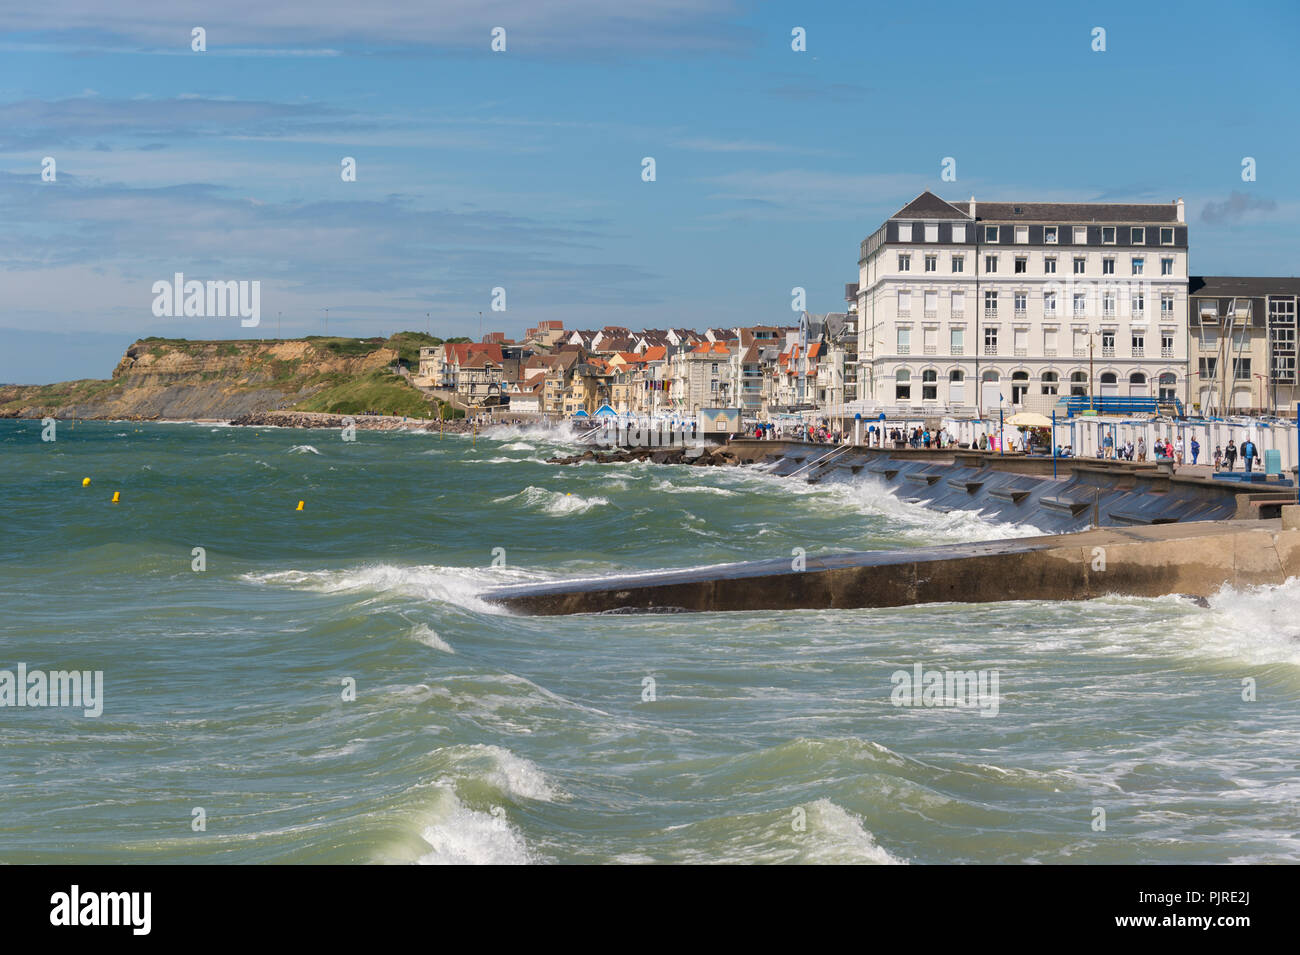 Wimereux, France - 16 June 2018: View of the sea front promenade as waves are hitting the seawall. Stock Photo